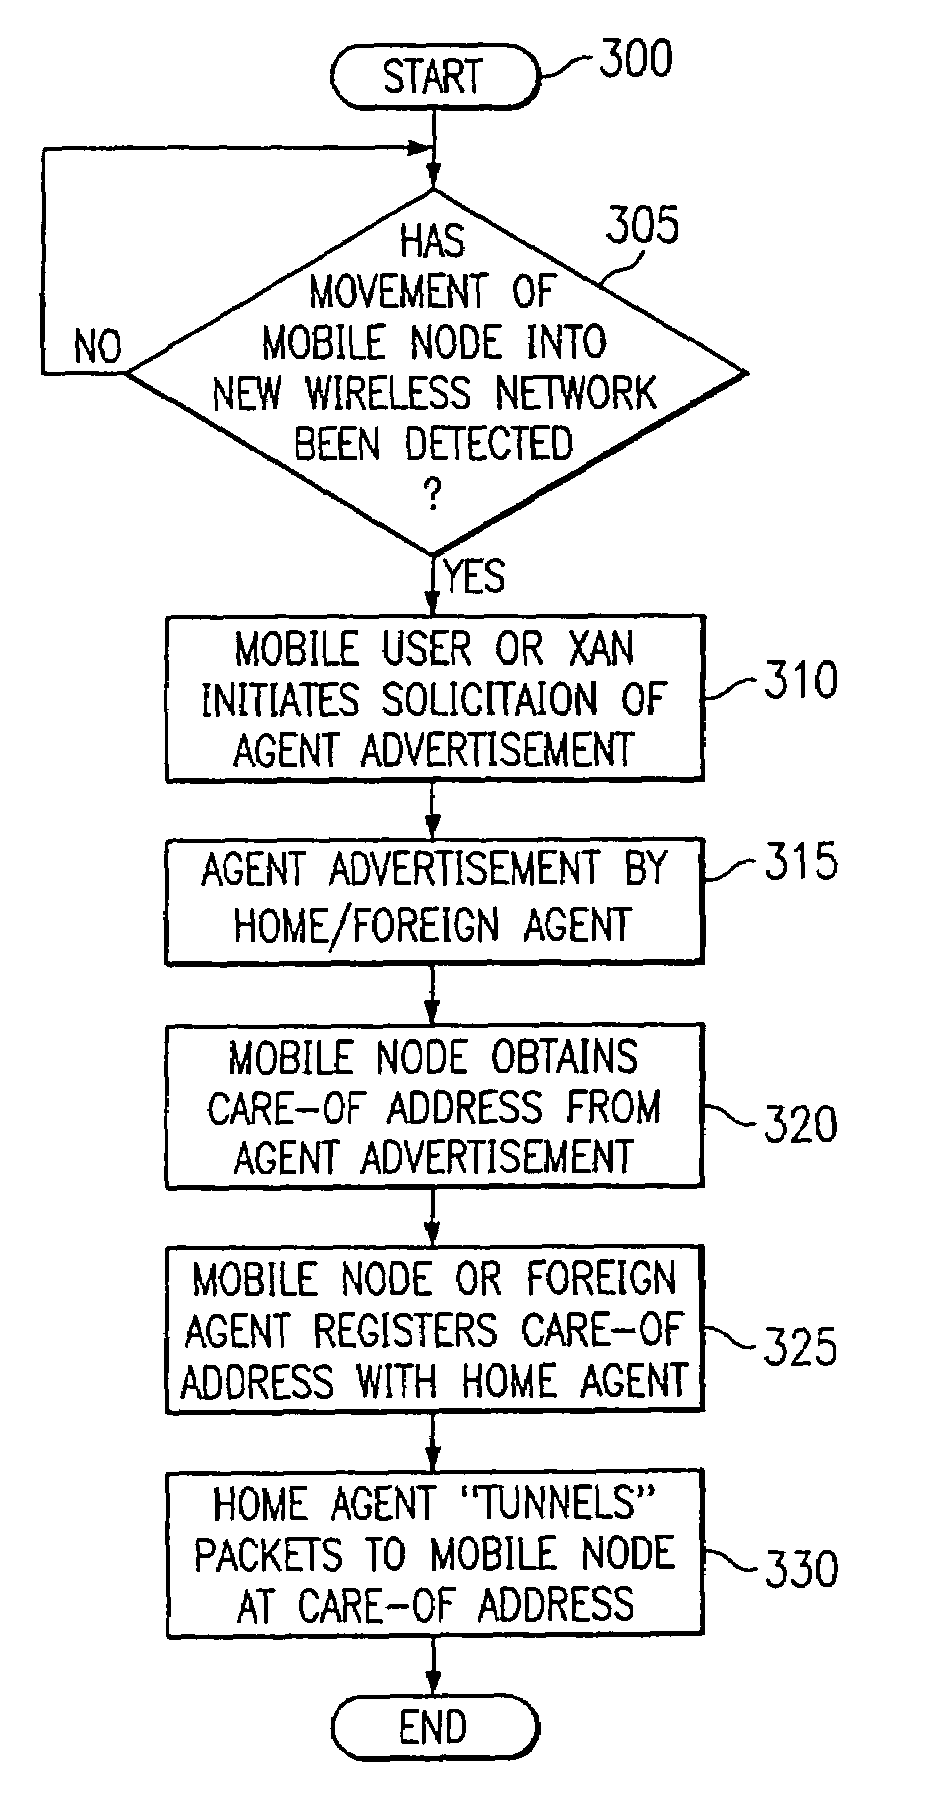 Unicast agent advertisement based on layer 2 and layer 3 motion detection